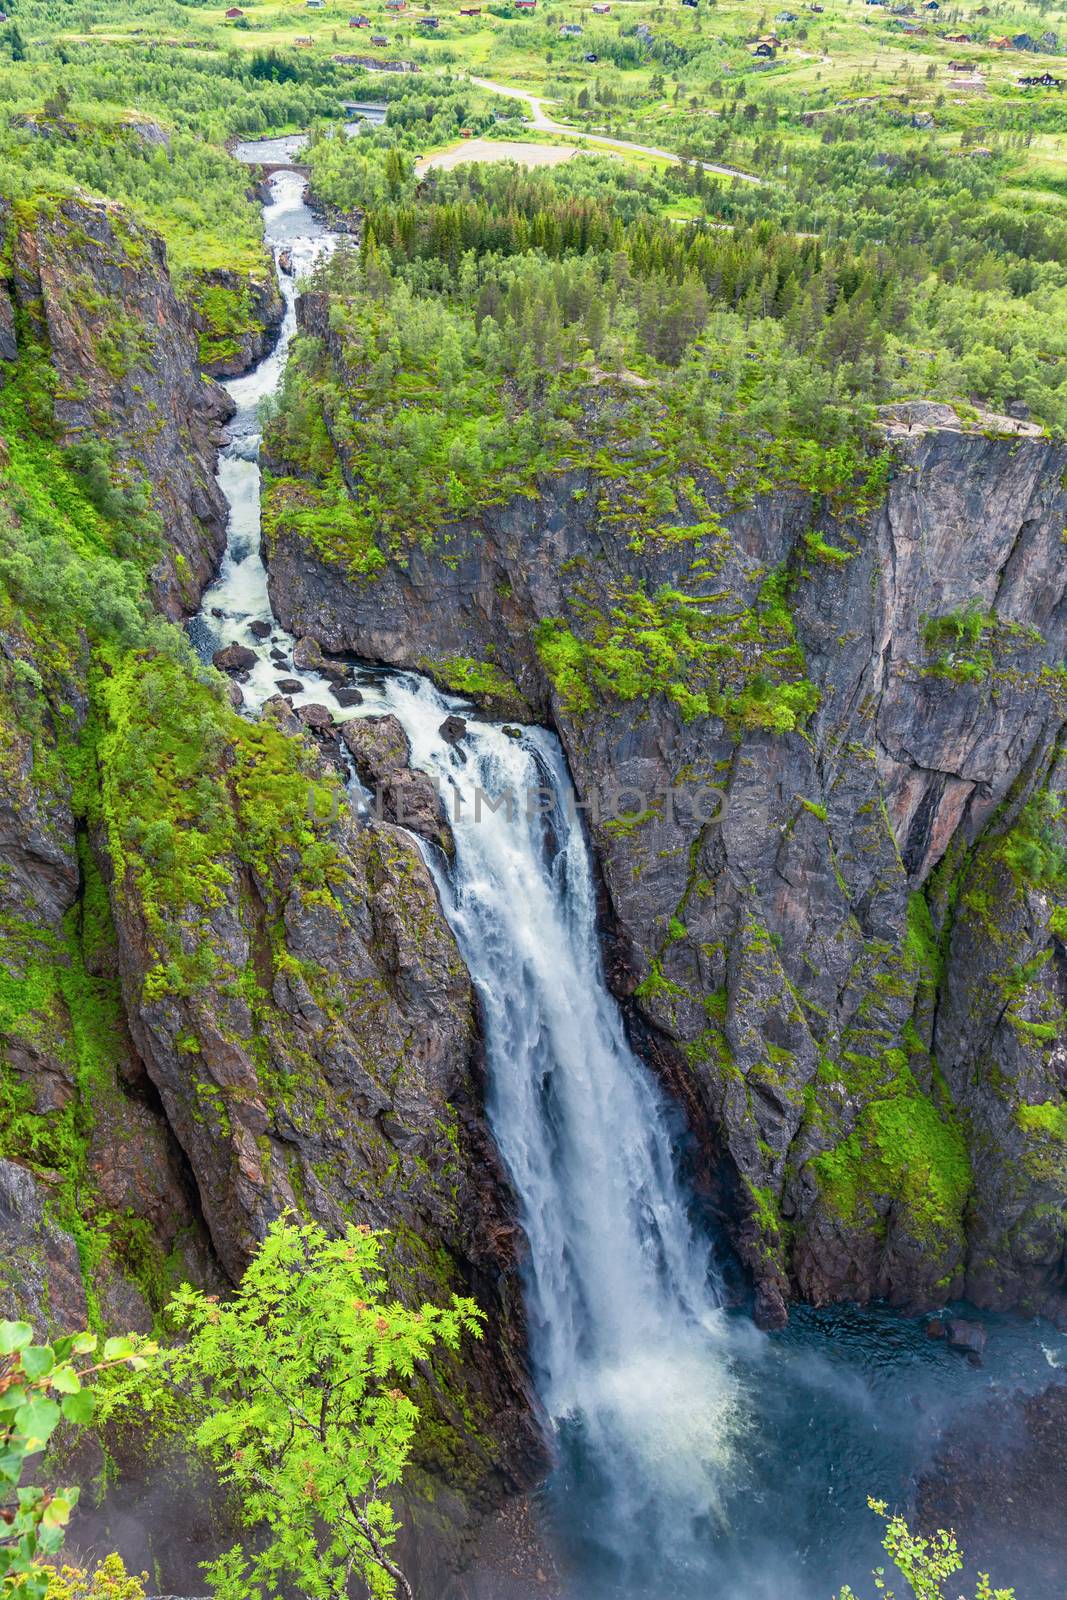 Voringsfossen Waterfall. Falls in mountains Norway by Sid10